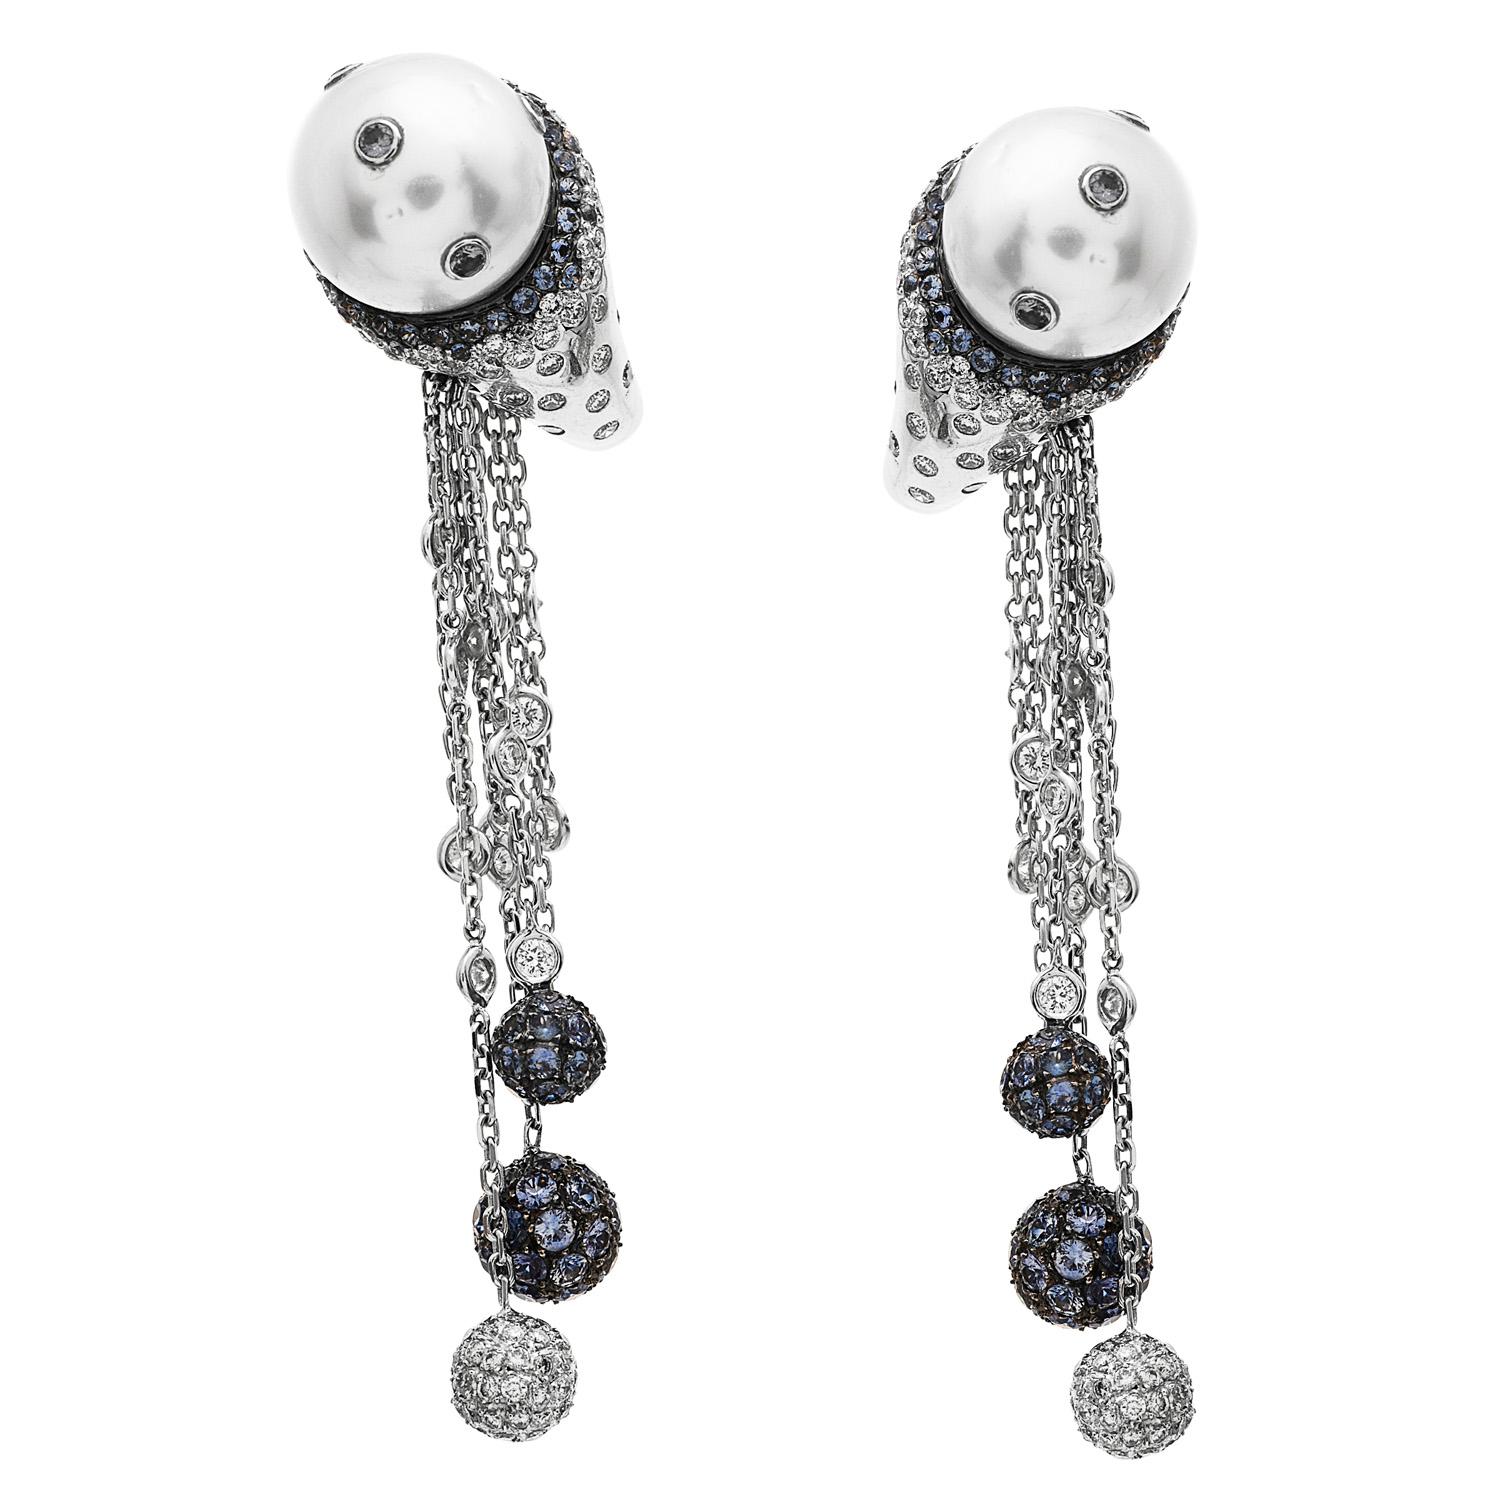 the unique Design for these Cluster Style Earrings is a complete piece of art!

  These dangle chain earrings are crafted in 18K White Gold. With Pave and bezel-set with approx. 2.10 carats of very fine diamonds approx. H-I color and